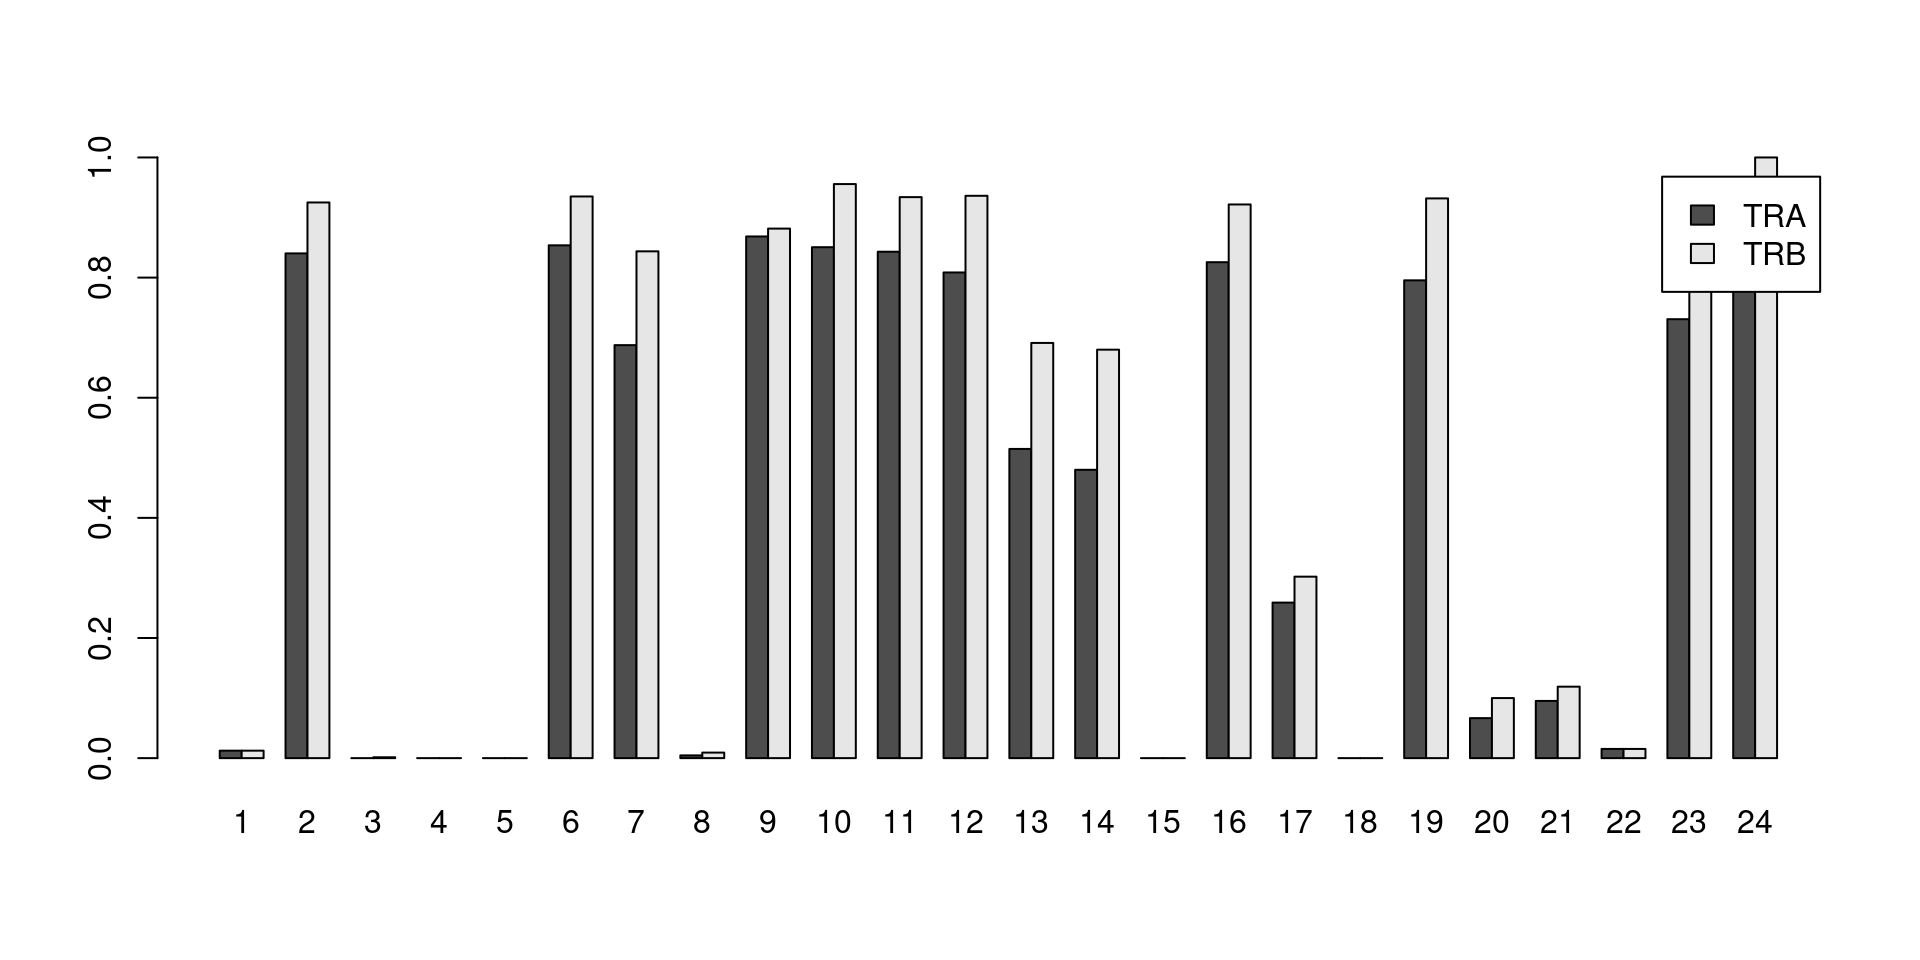 Proportion of cells in each cluster that express at least one productive sequence of the TCR $\alpha$ (dark) or $\beta$-chains (light).